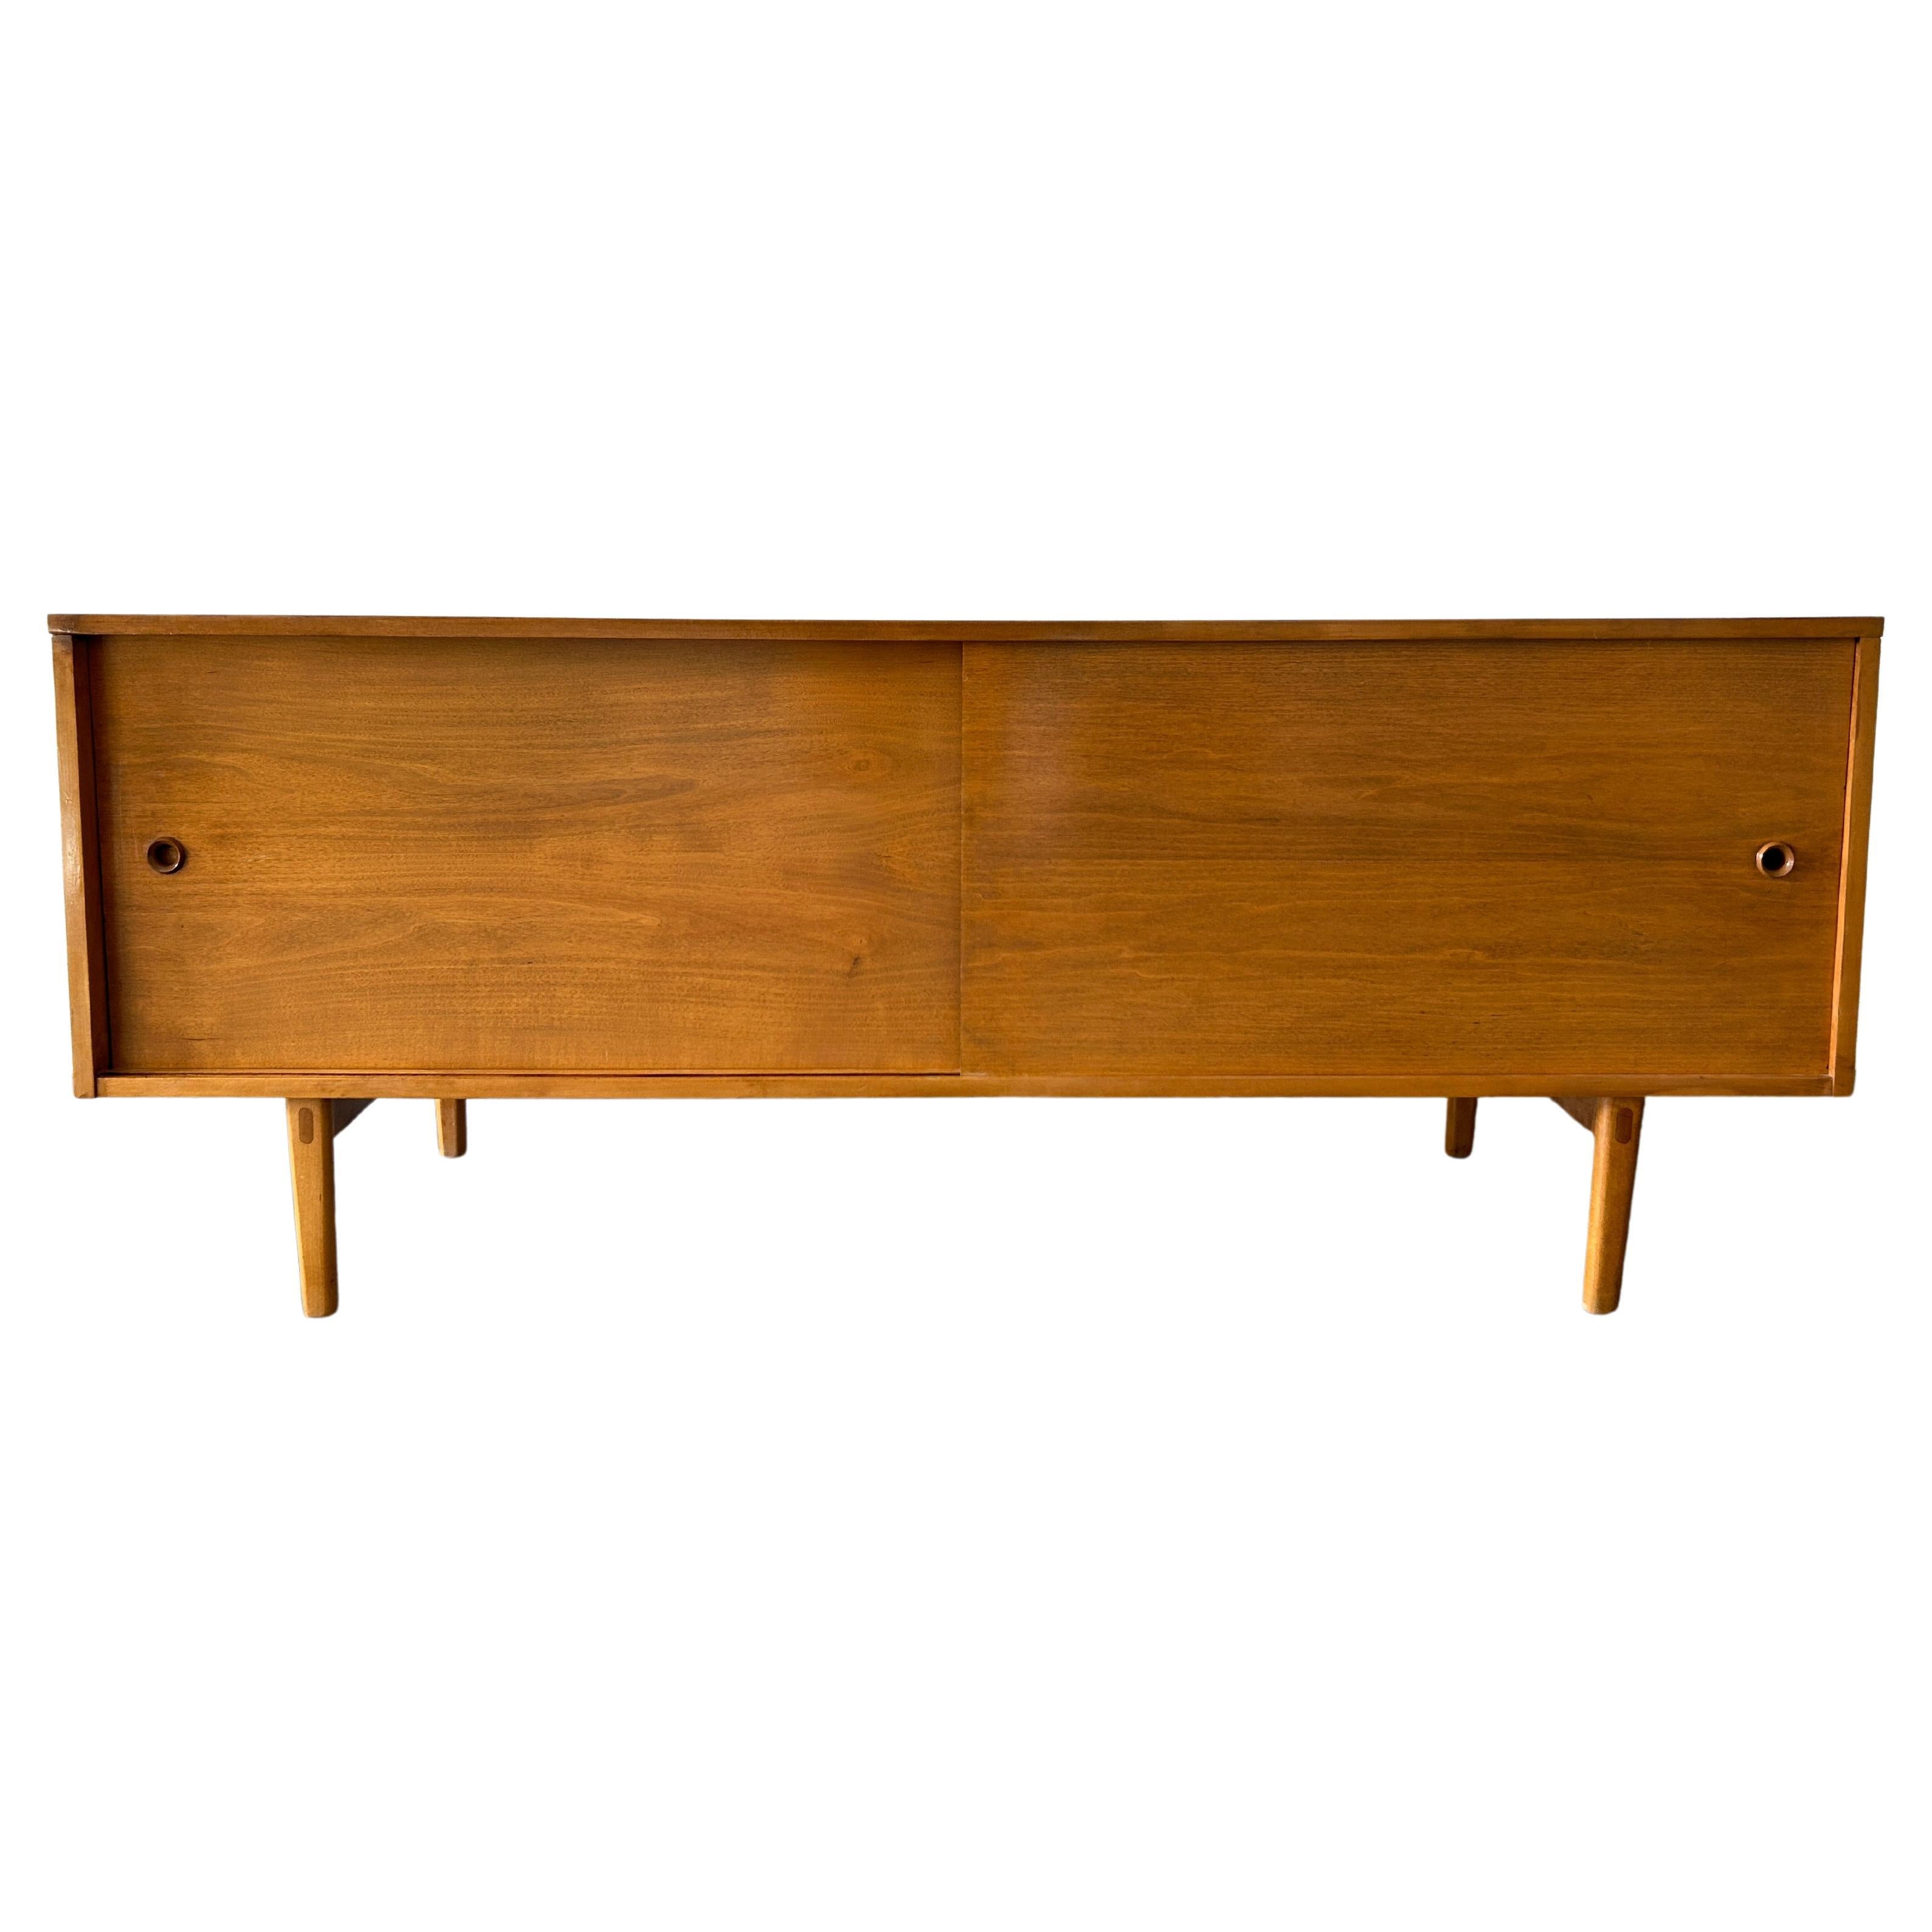 Mid-Century Credenza by Paul McCobb Planner Group #1513 Blonde Doors Maple